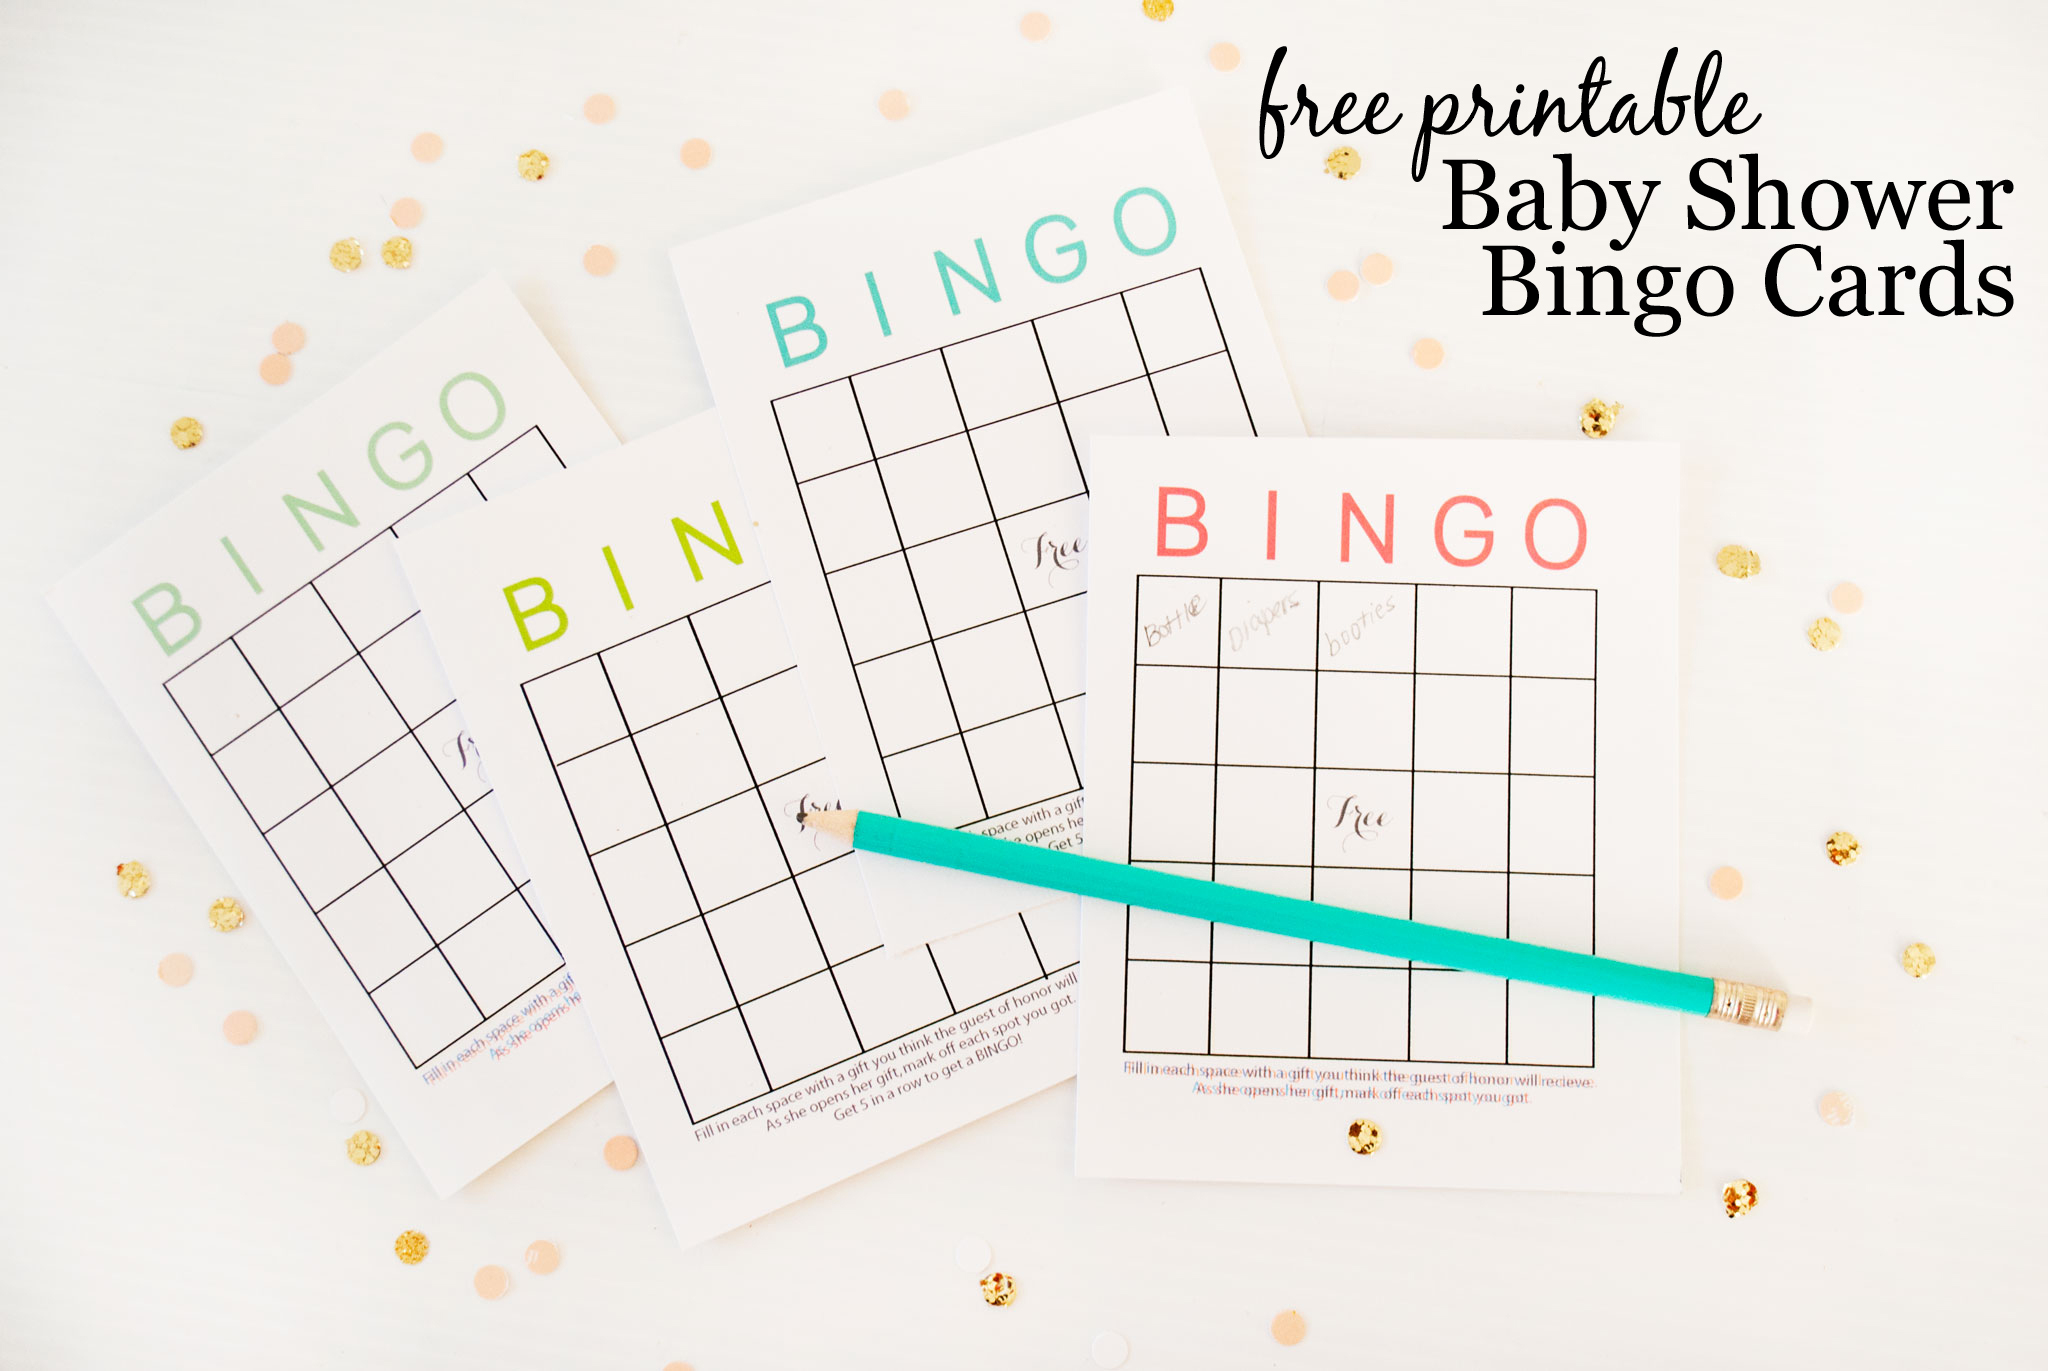 Free Printable Baby Shower Bingo Cards - Project Nursery - Printable Baby Shower Bingo Games Free